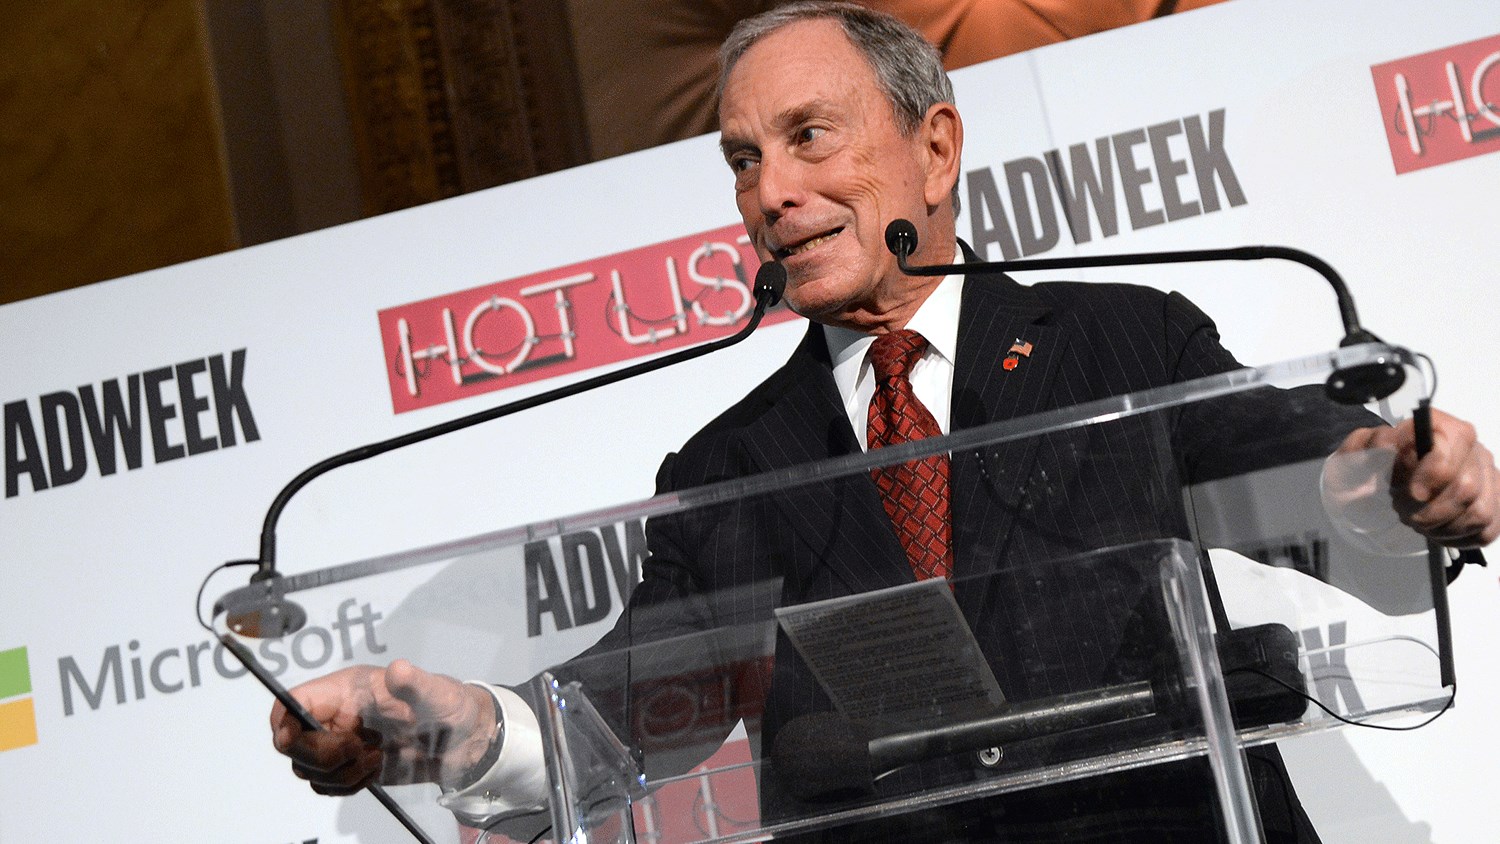 Washington Post Reports Bloomberg Group Planned Deceptive Racially-Charged Attack Ads in Virginia State Senate Contest